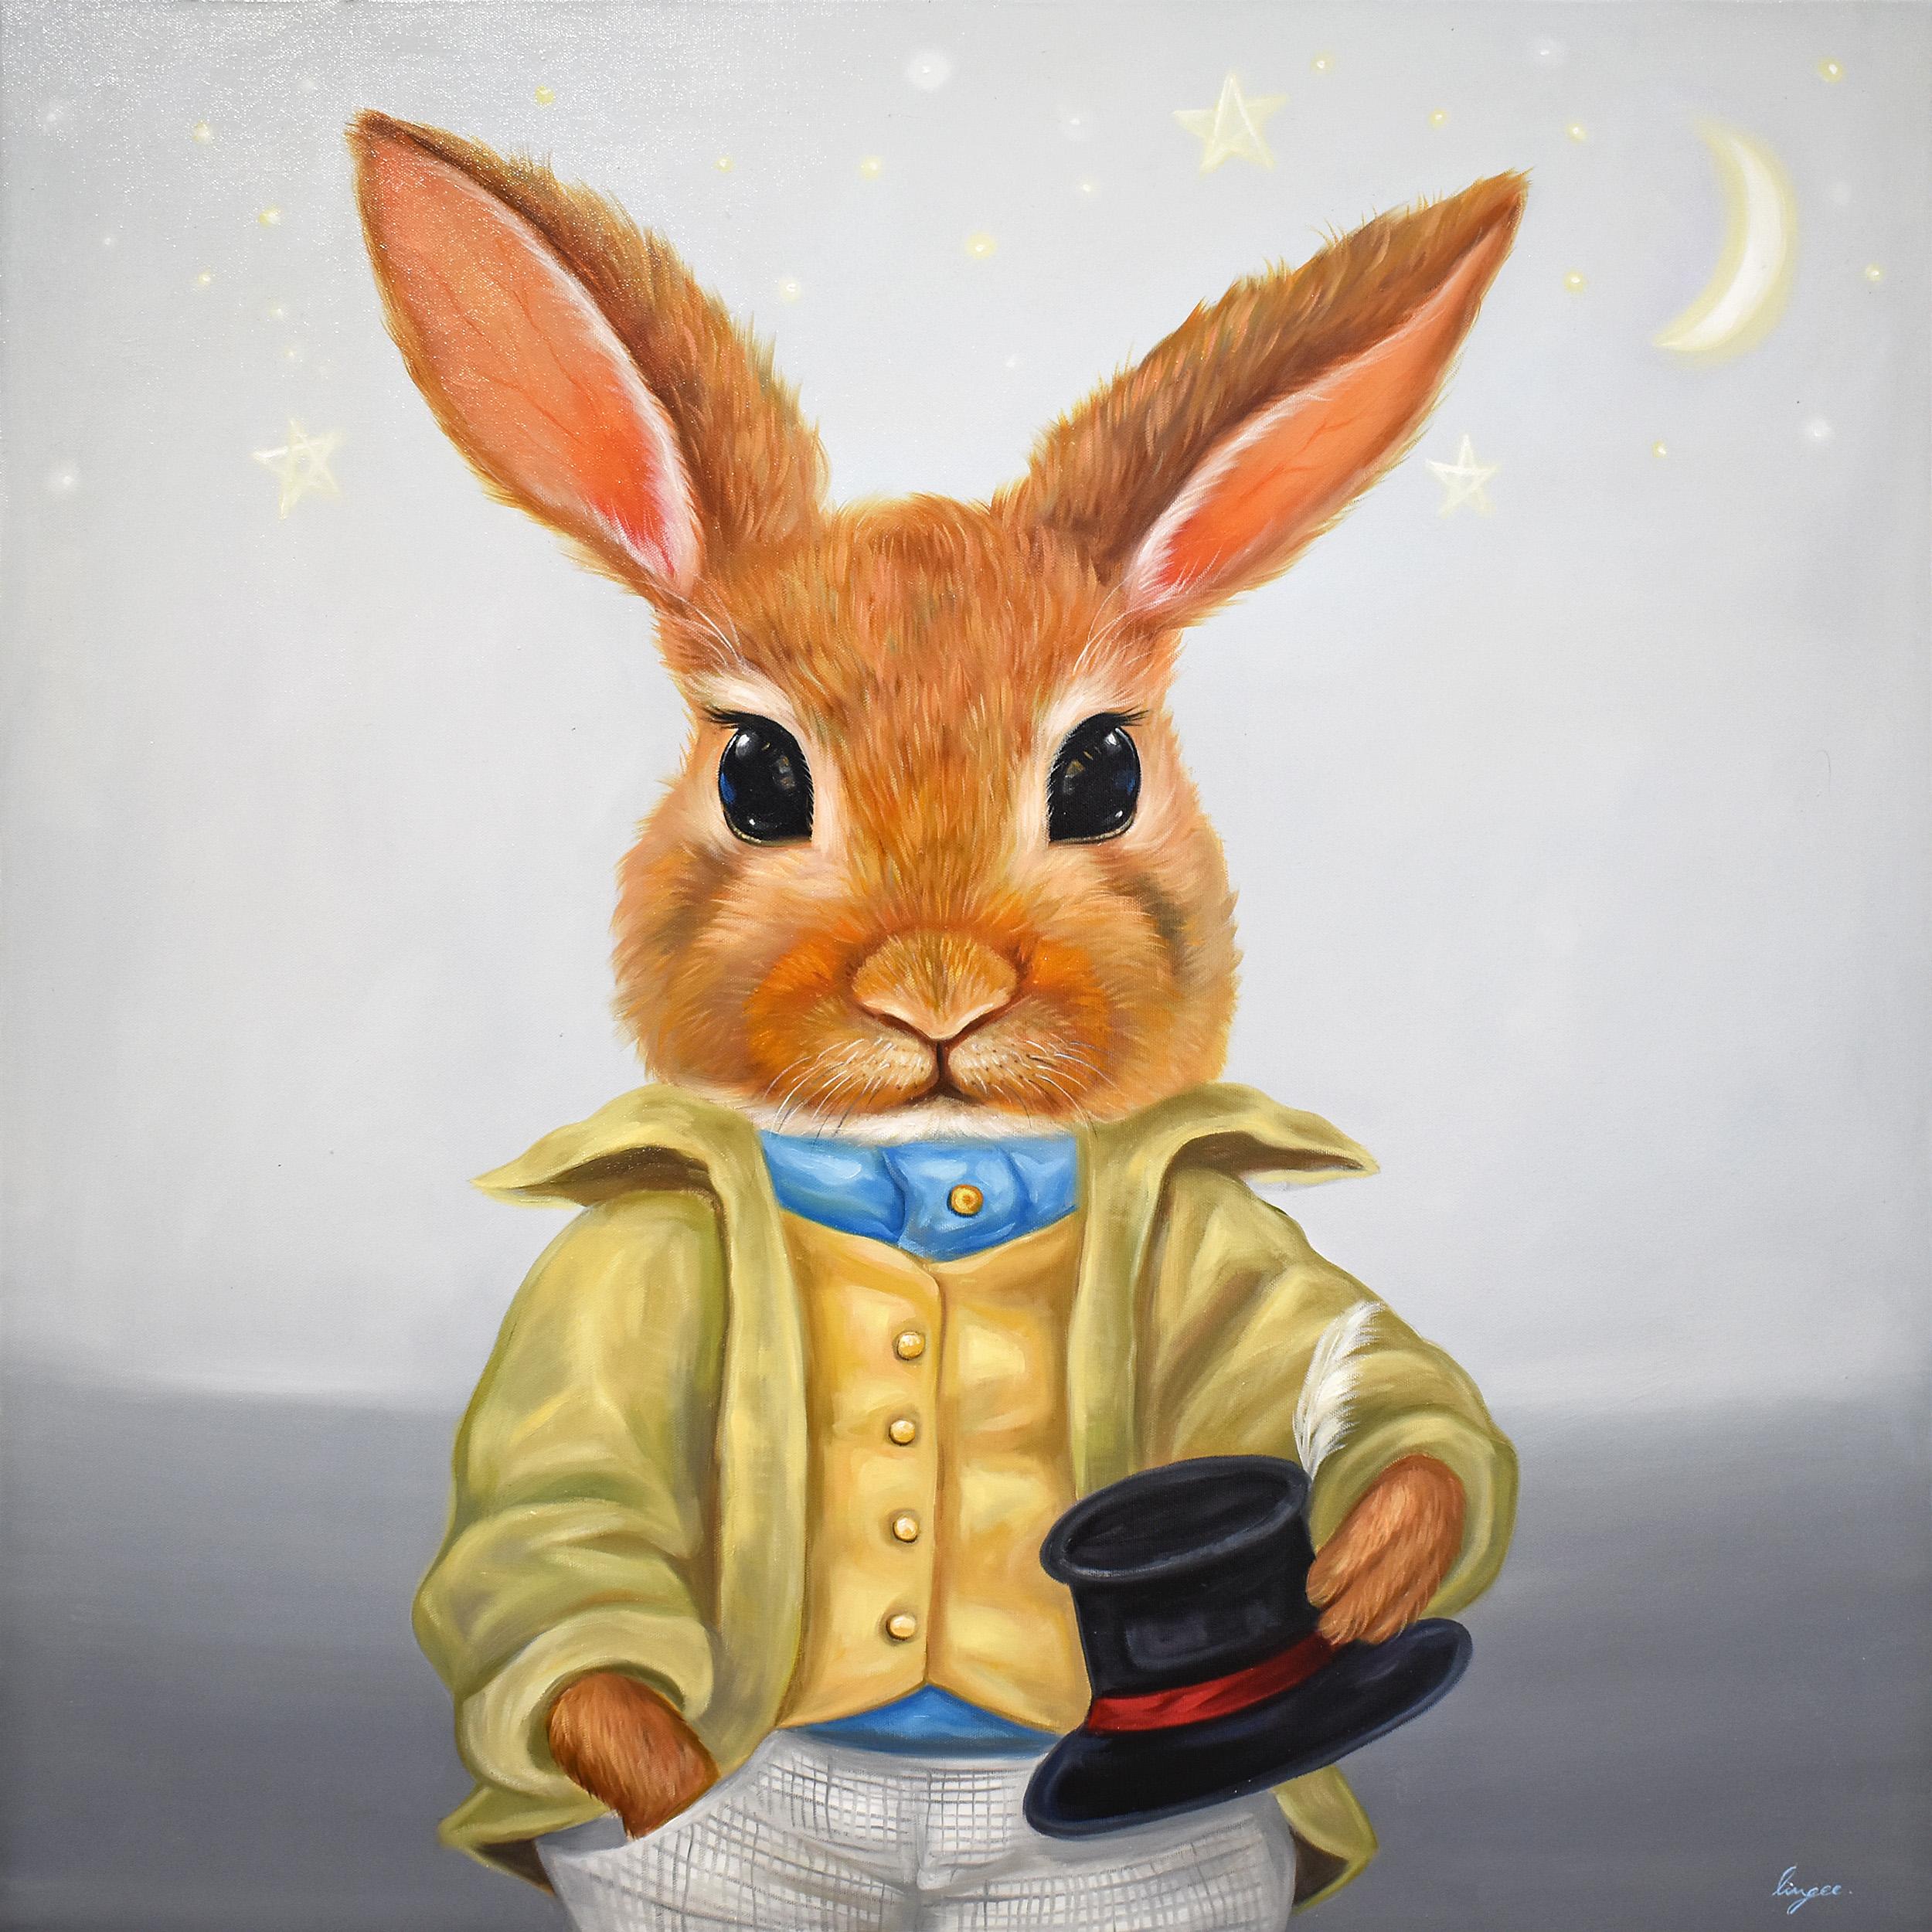 Lingee Bangkhuntod Animal Painting - Dapper Rabbits - "Pleasure to meet you". Rabbit in Vintage Clothing. 